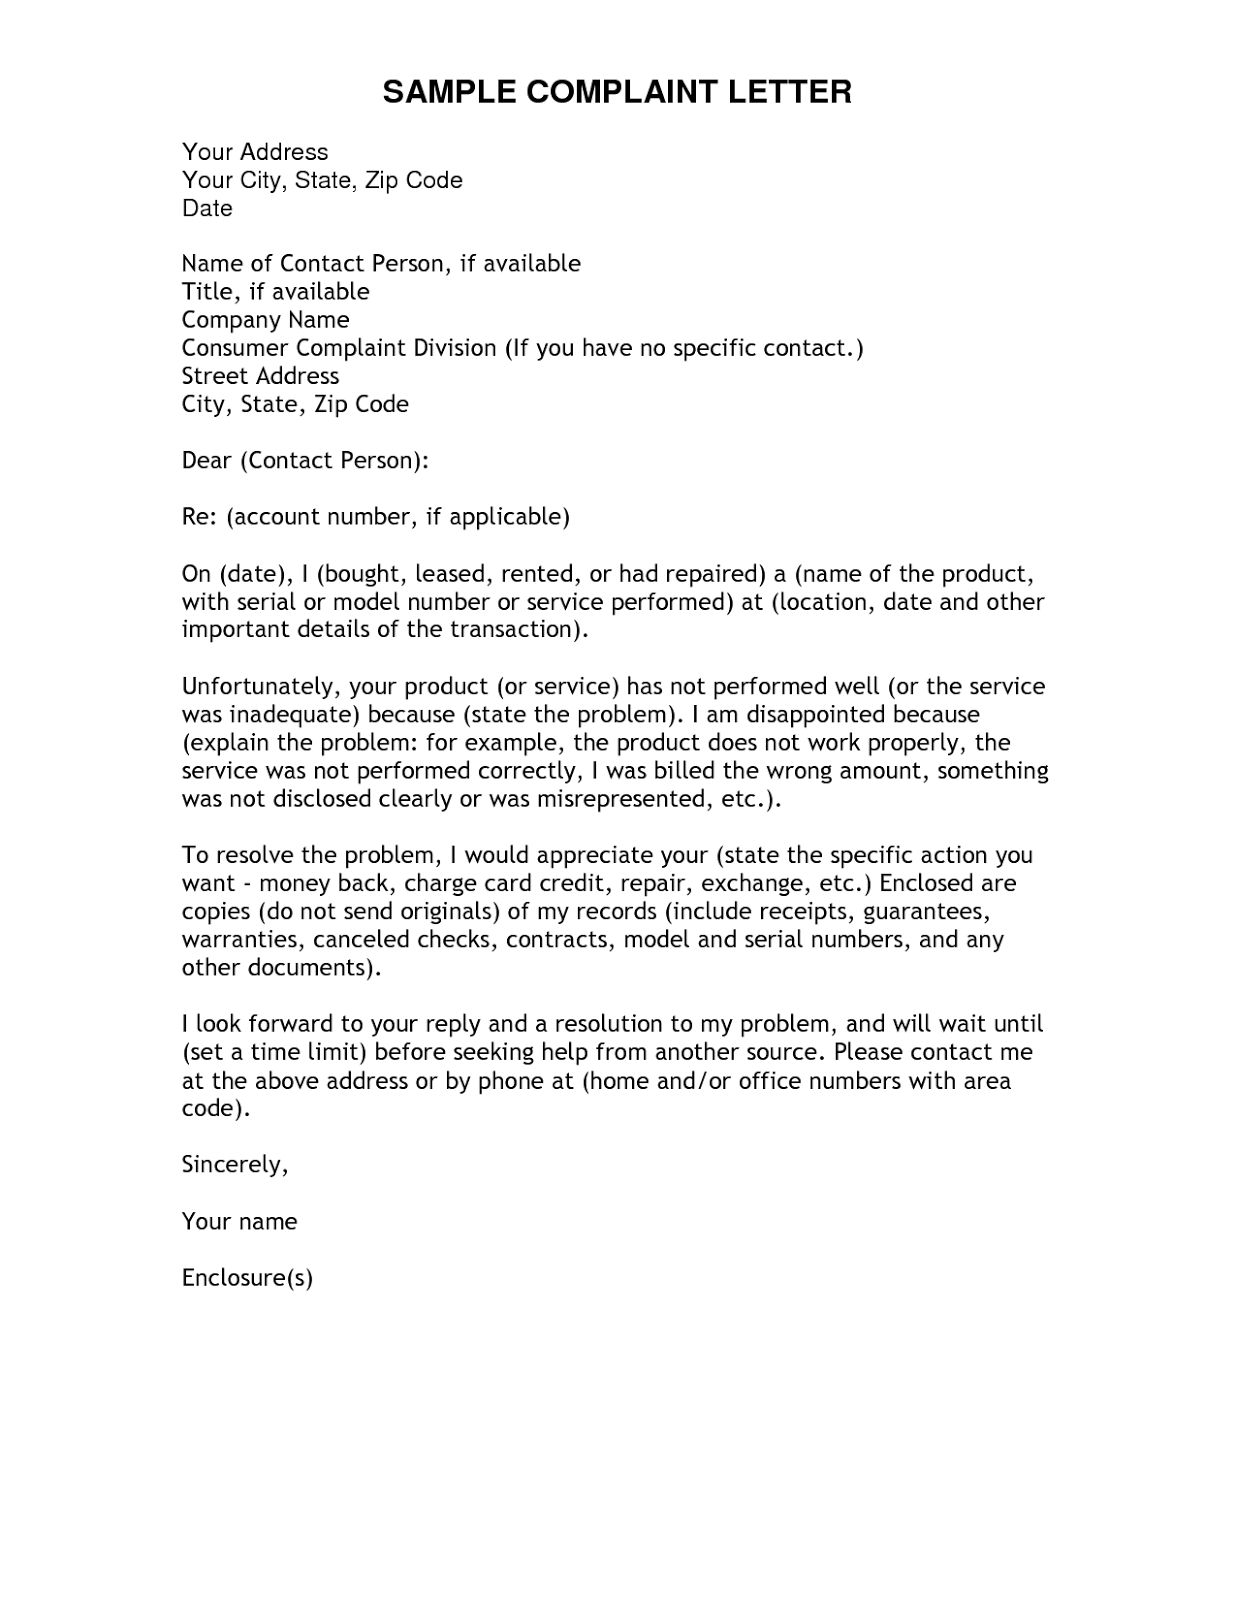 Example Of A Complaint Letter To Company - Cover Letter 